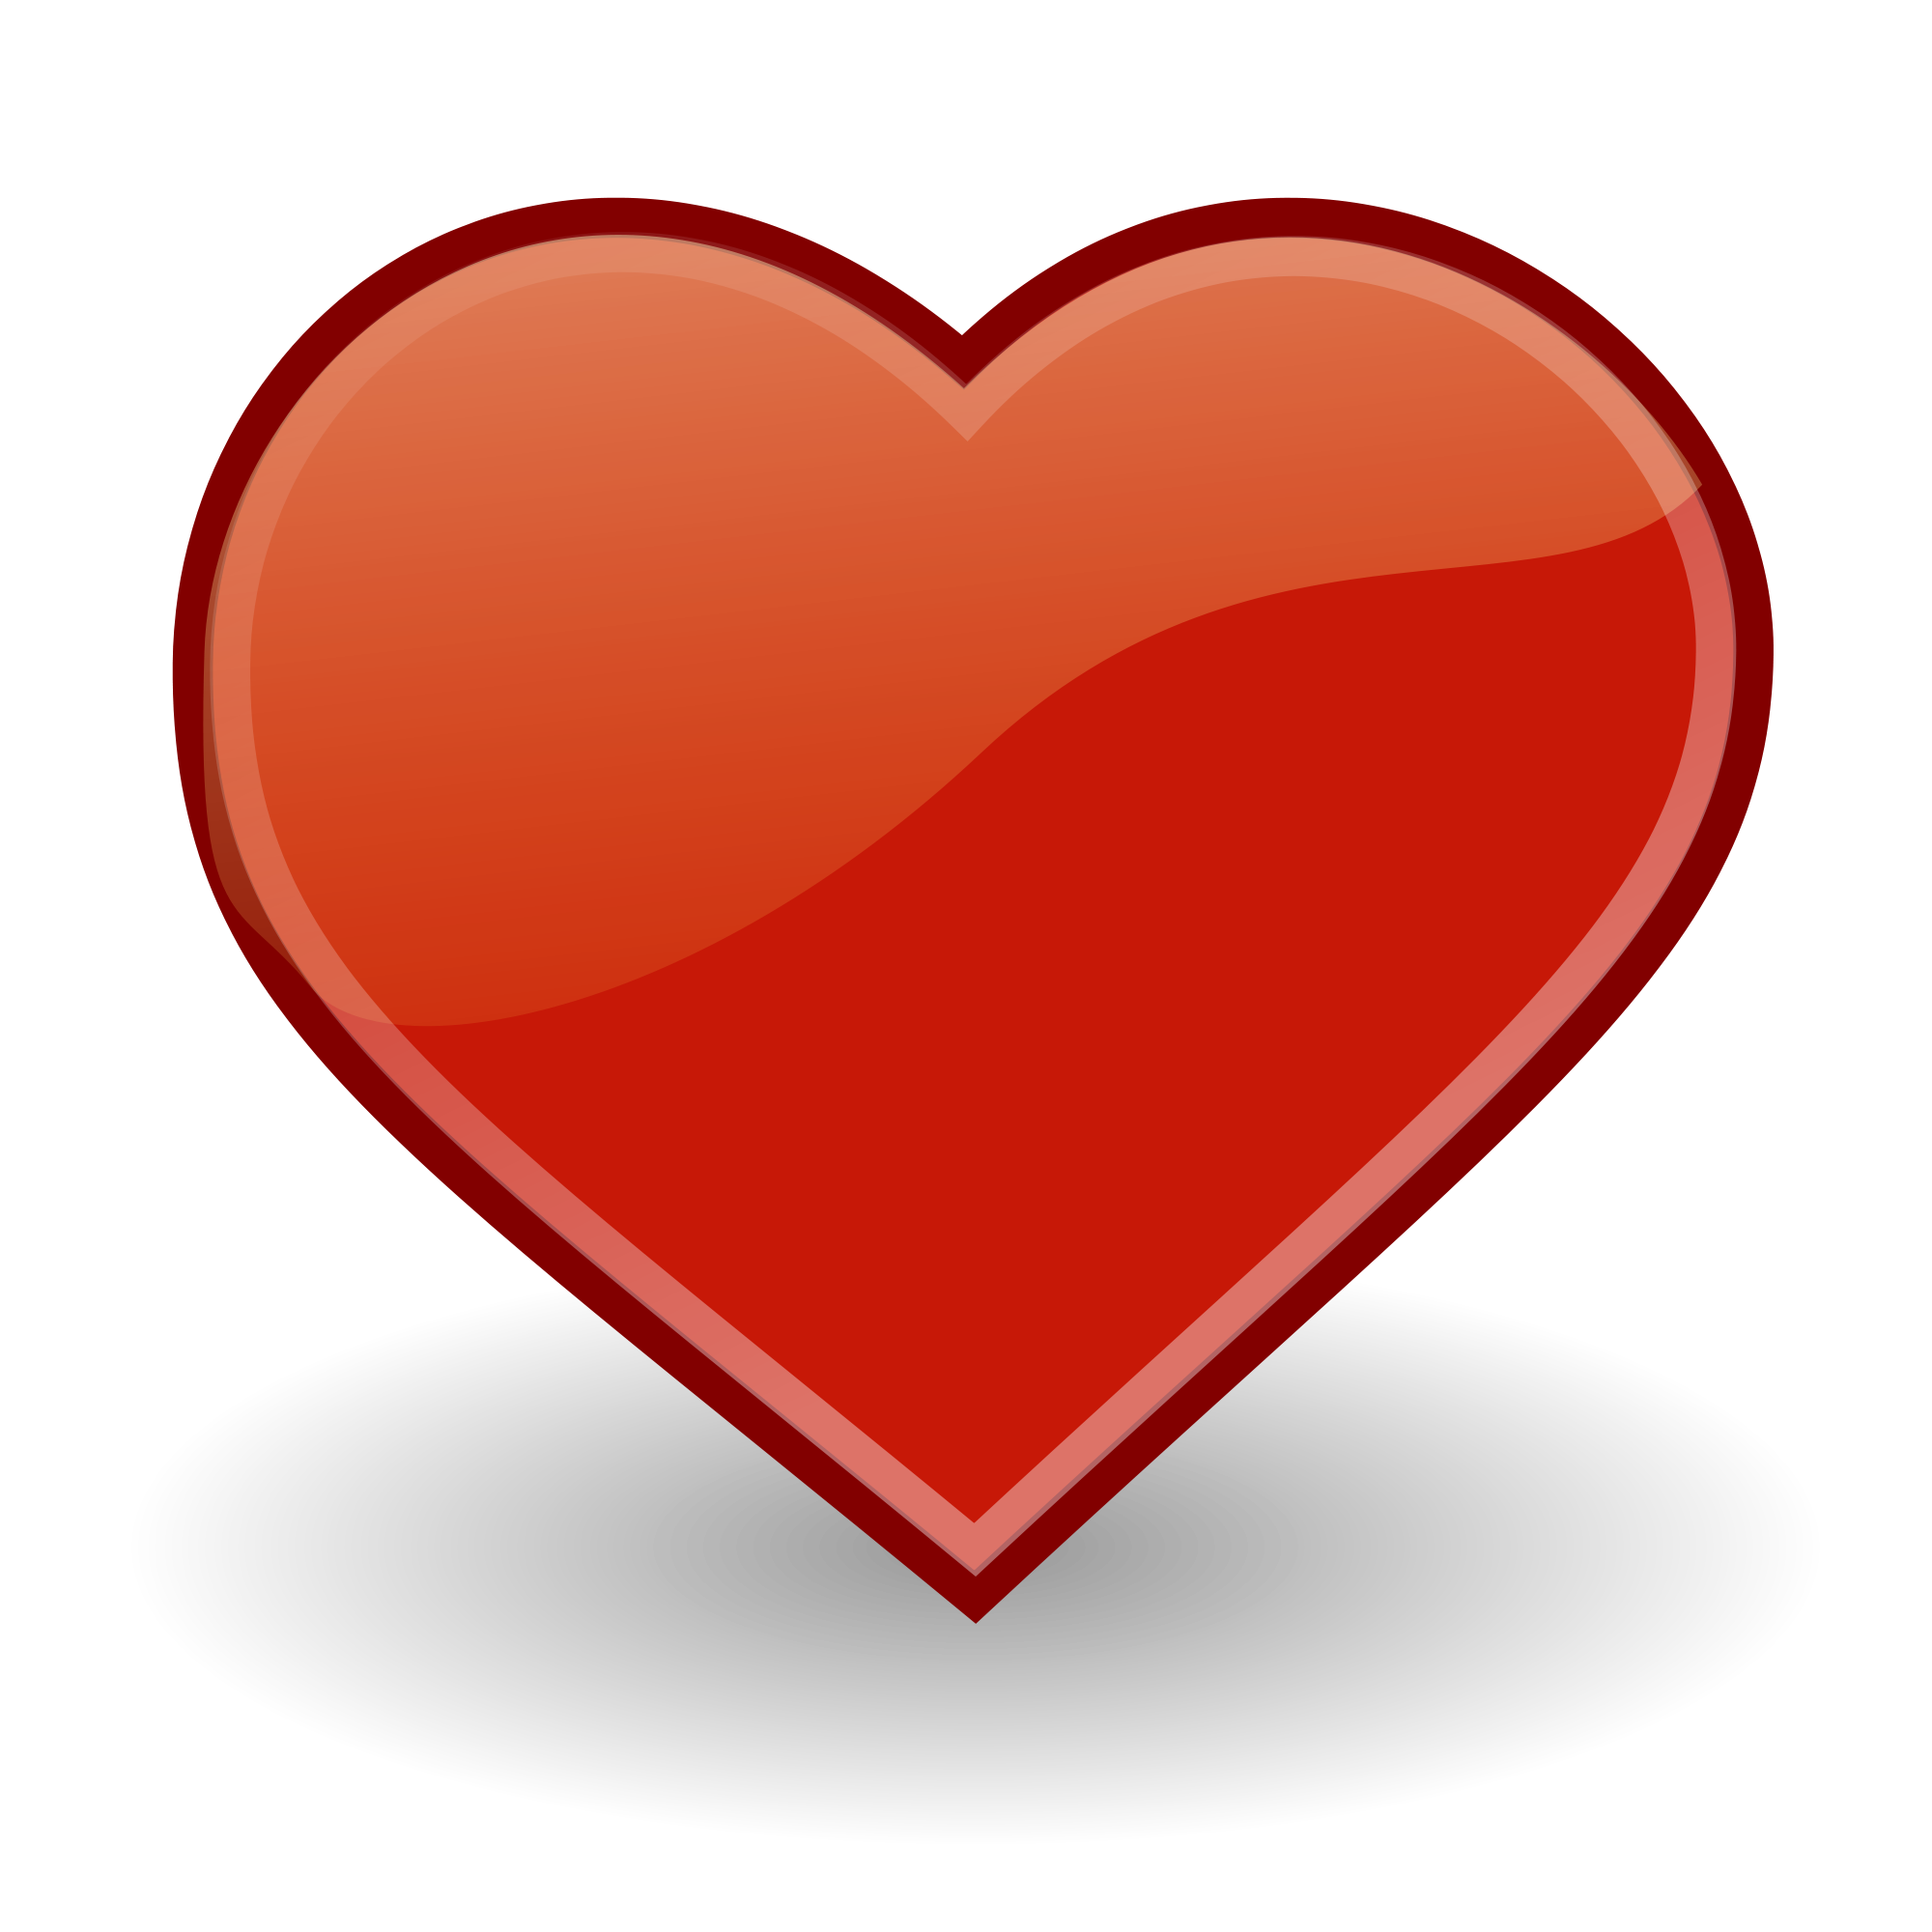 hearts heart love free wallpaper and background | Wallpaper Likes